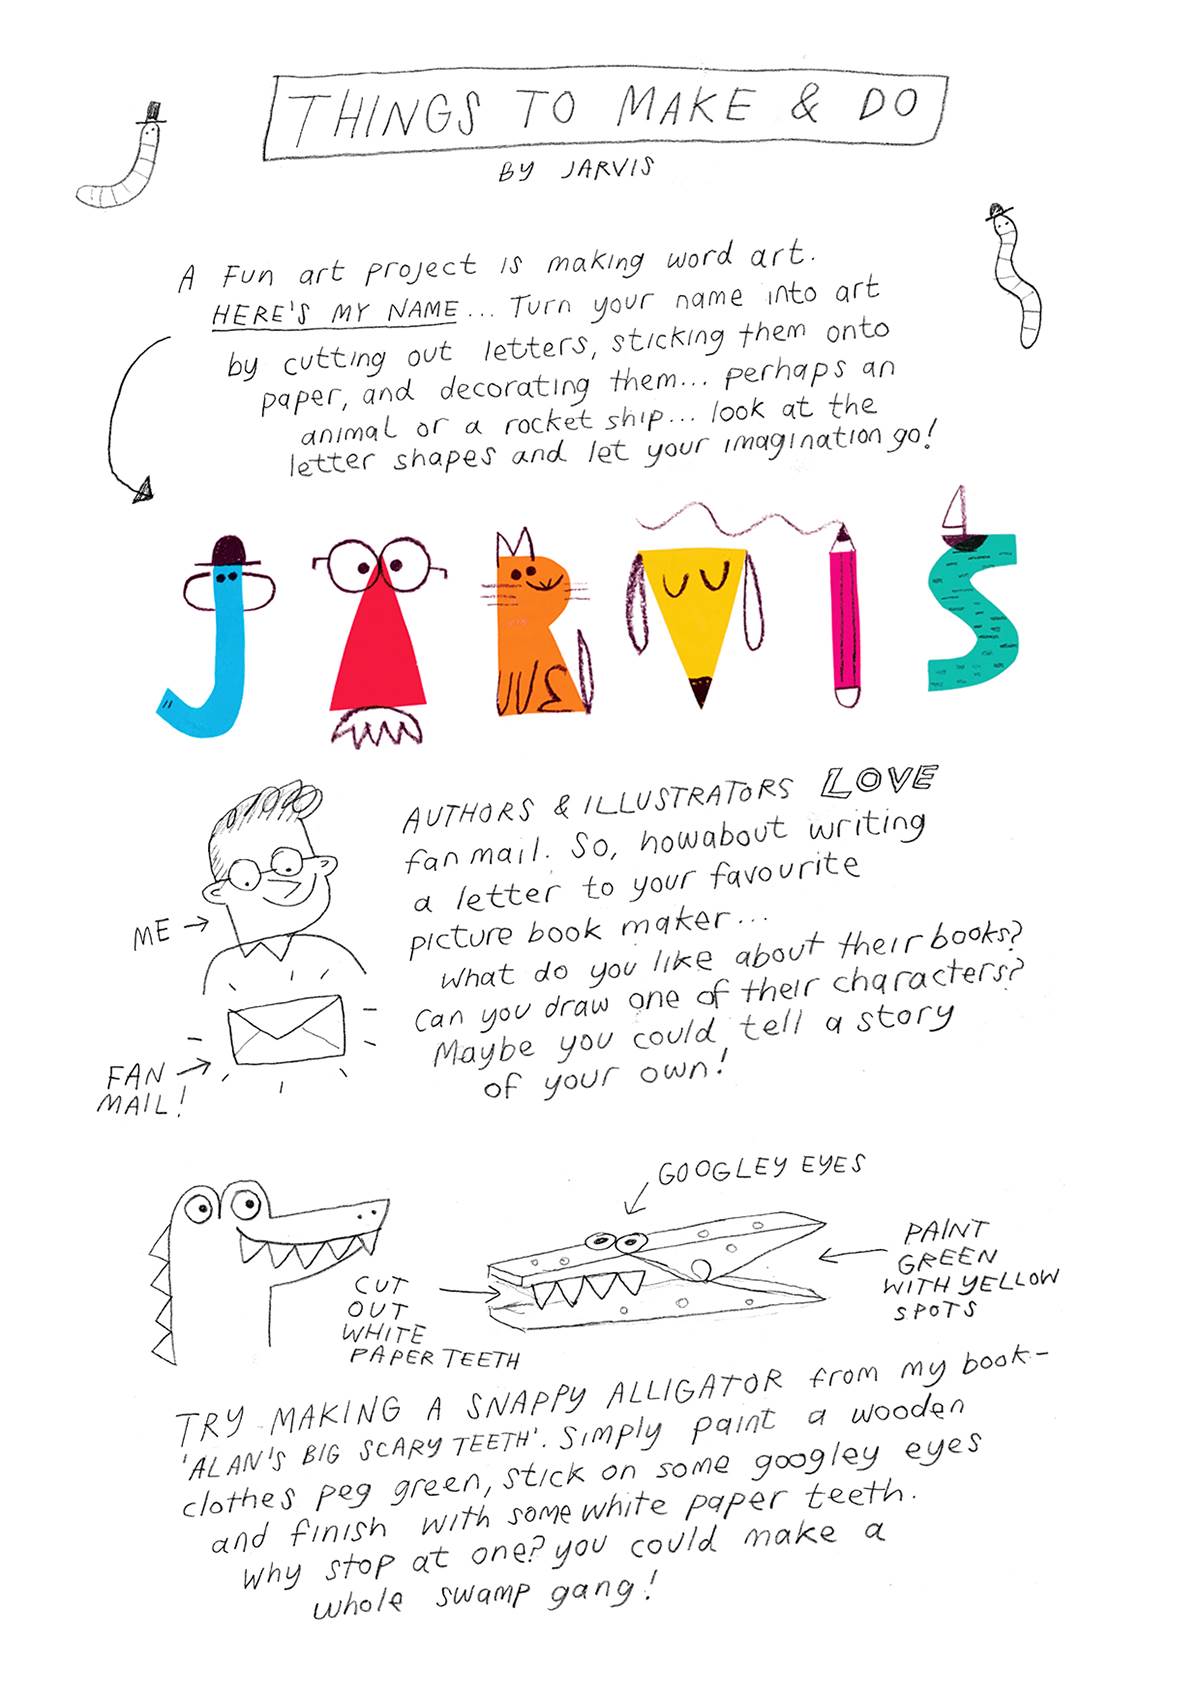 Jarvis's fun things to make and do